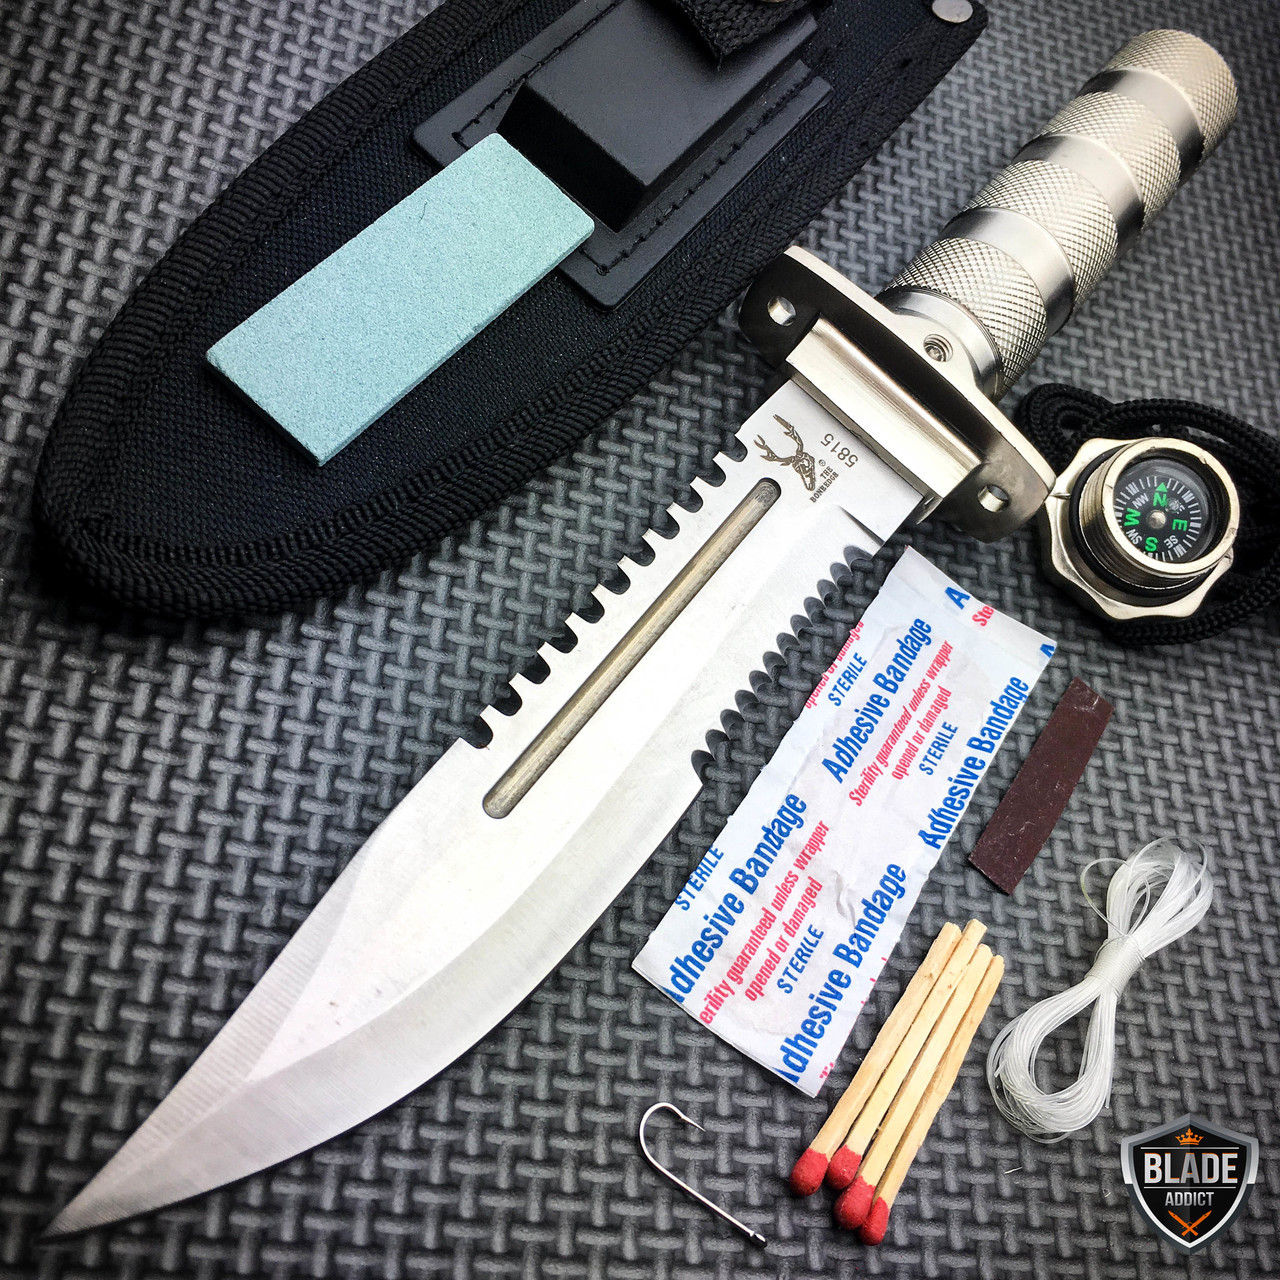 11 Tactical Fishing Hunting CAMPING Knife FIXED BLADE Bowie + Survival Kit  NEW - MEGAKNIFE